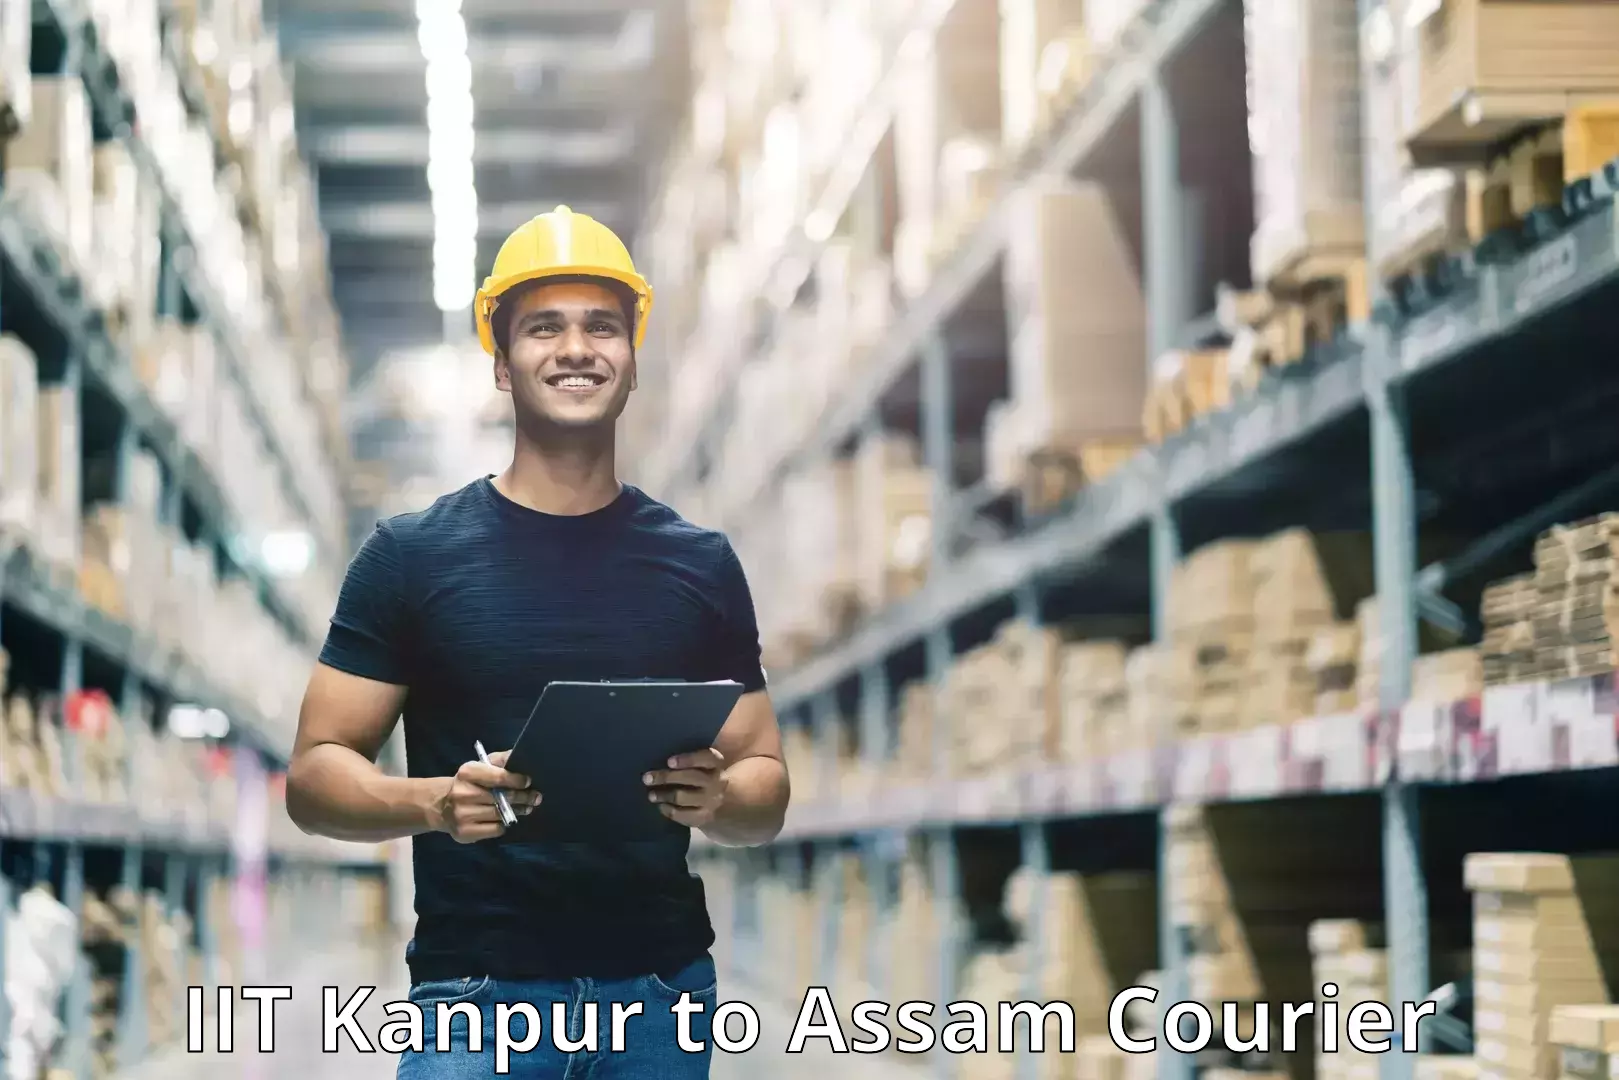 User-friendly delivery service IIT Kanpur to Assam